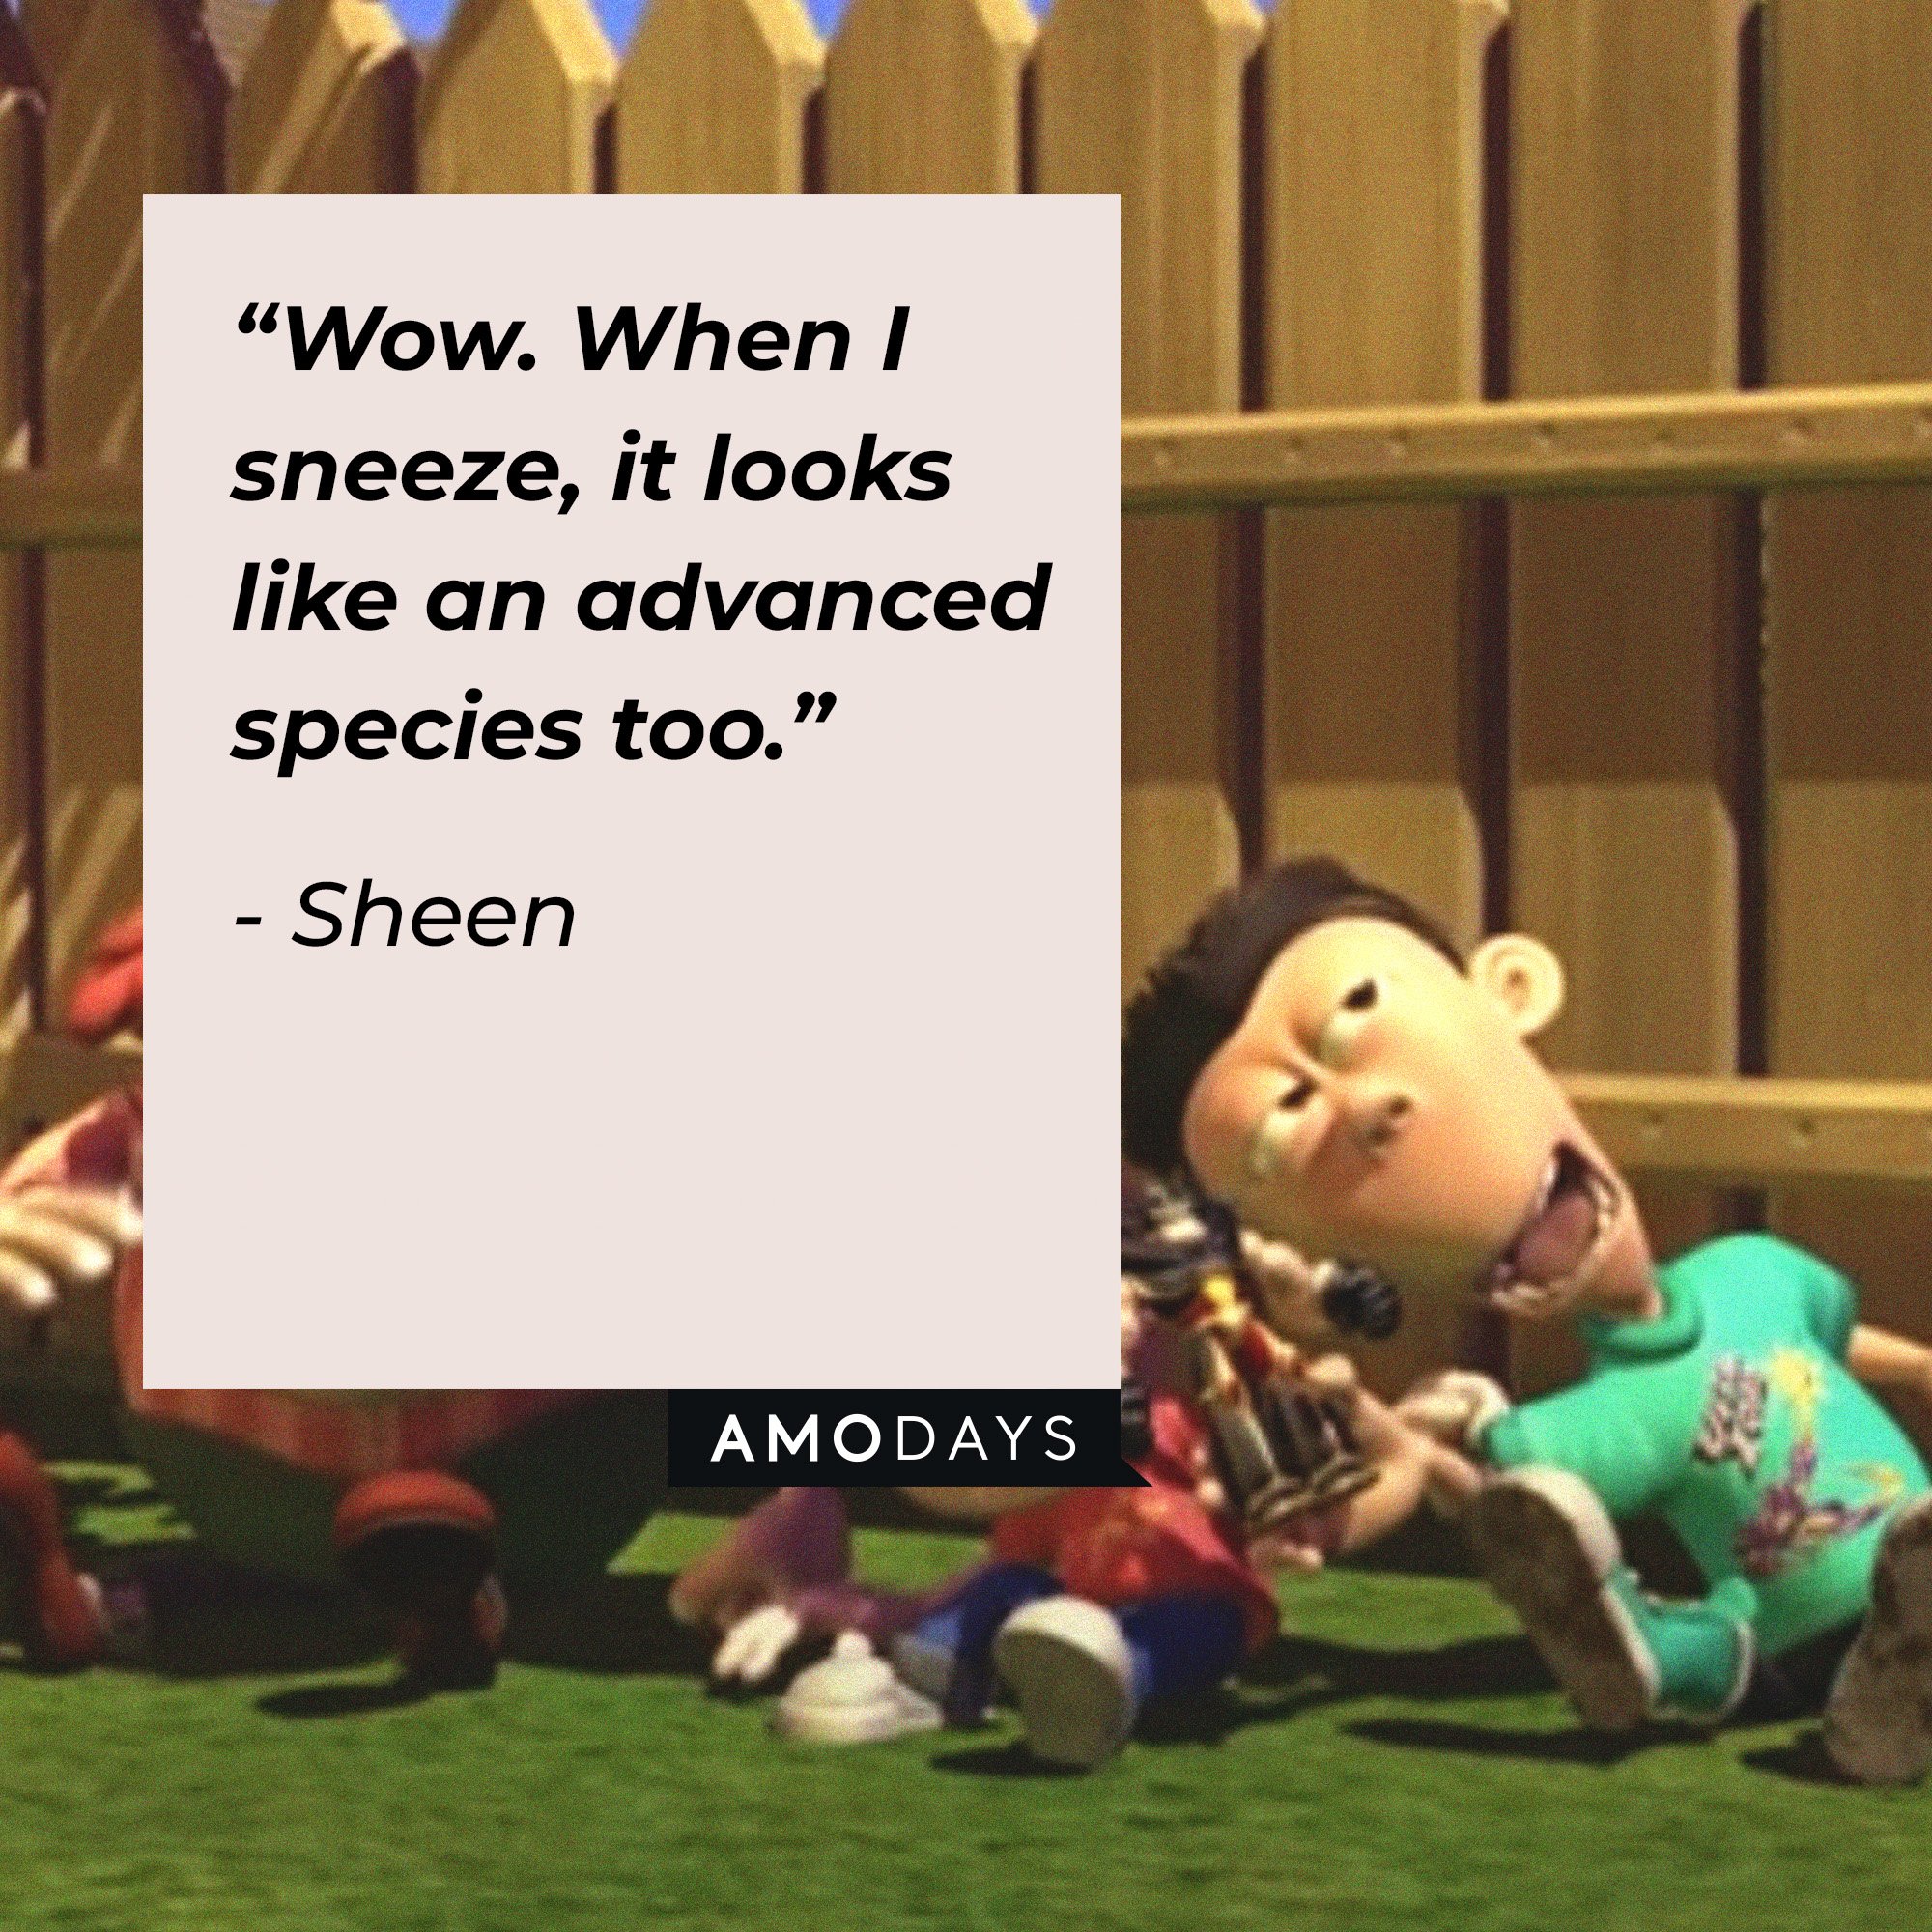 Sheen’s quote: “Wow. When I sneeze, it looks like an advanced species too.” | Image: AmoDays